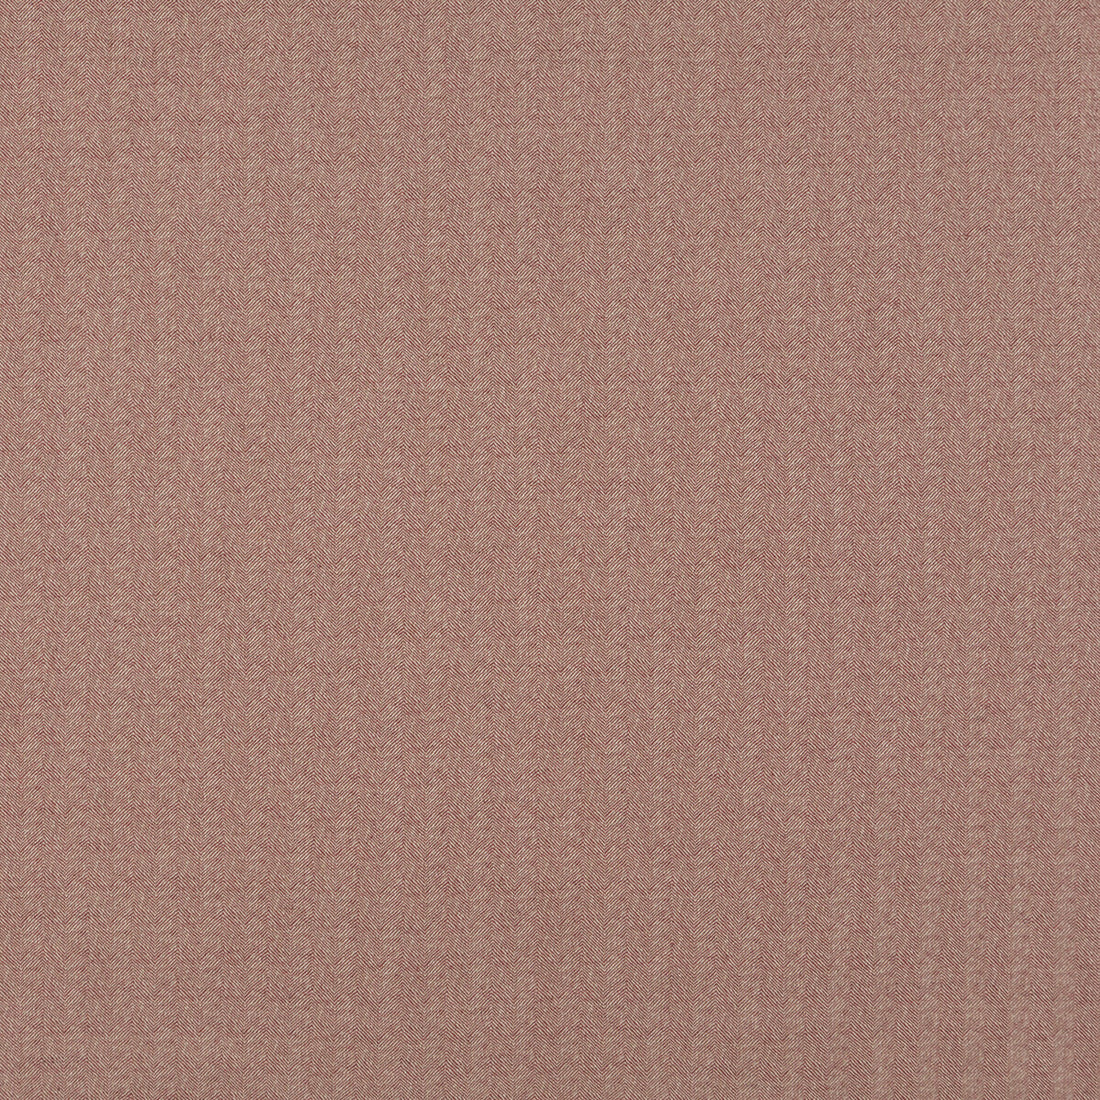 Canyon fabric in raspberry color - pattern BF10680.475.0 - by G P &amp; J Baker in the Essential Colours collection